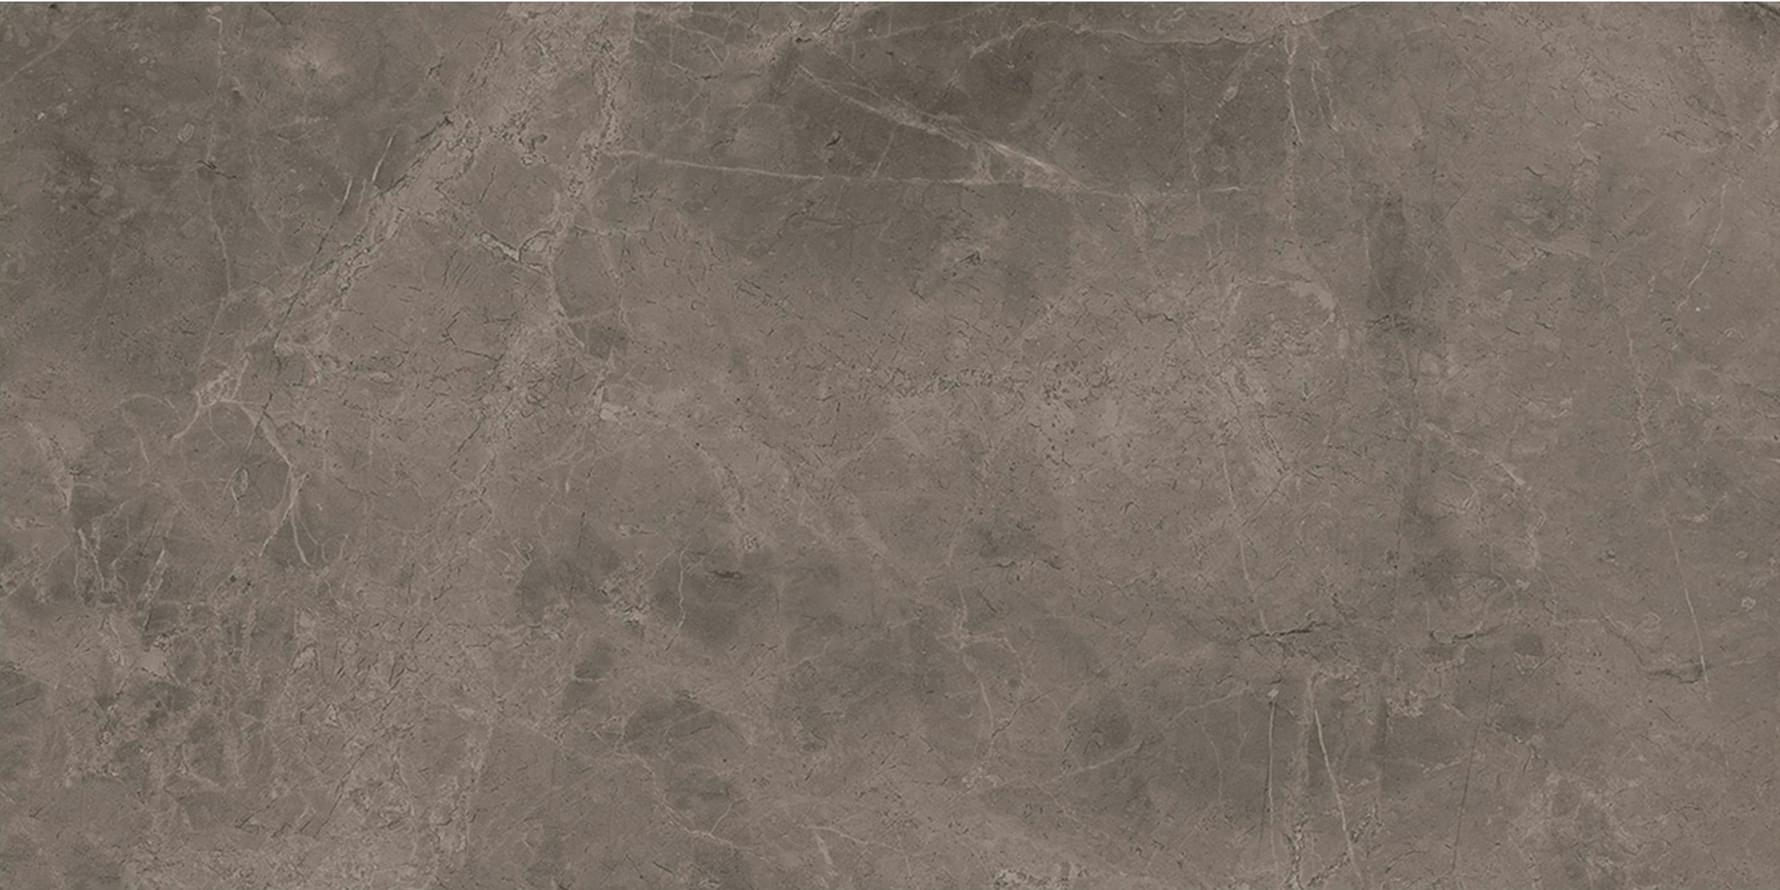 Magica Marstood Marble 03 Fior Di Bosco Polished Rectified 30x60